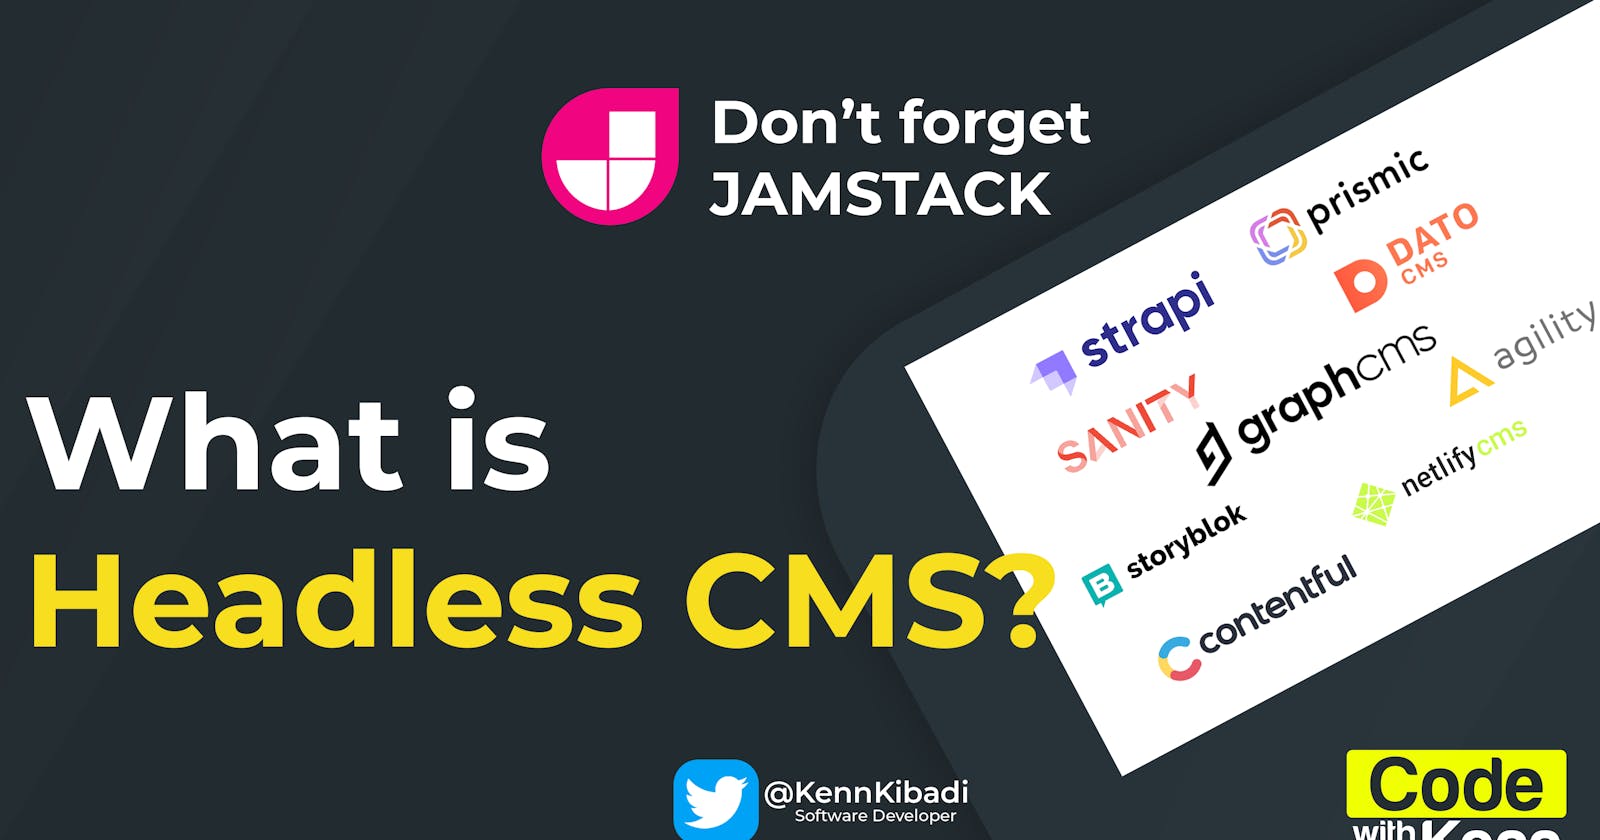 Did you know you can run a Business with Headless CMS?